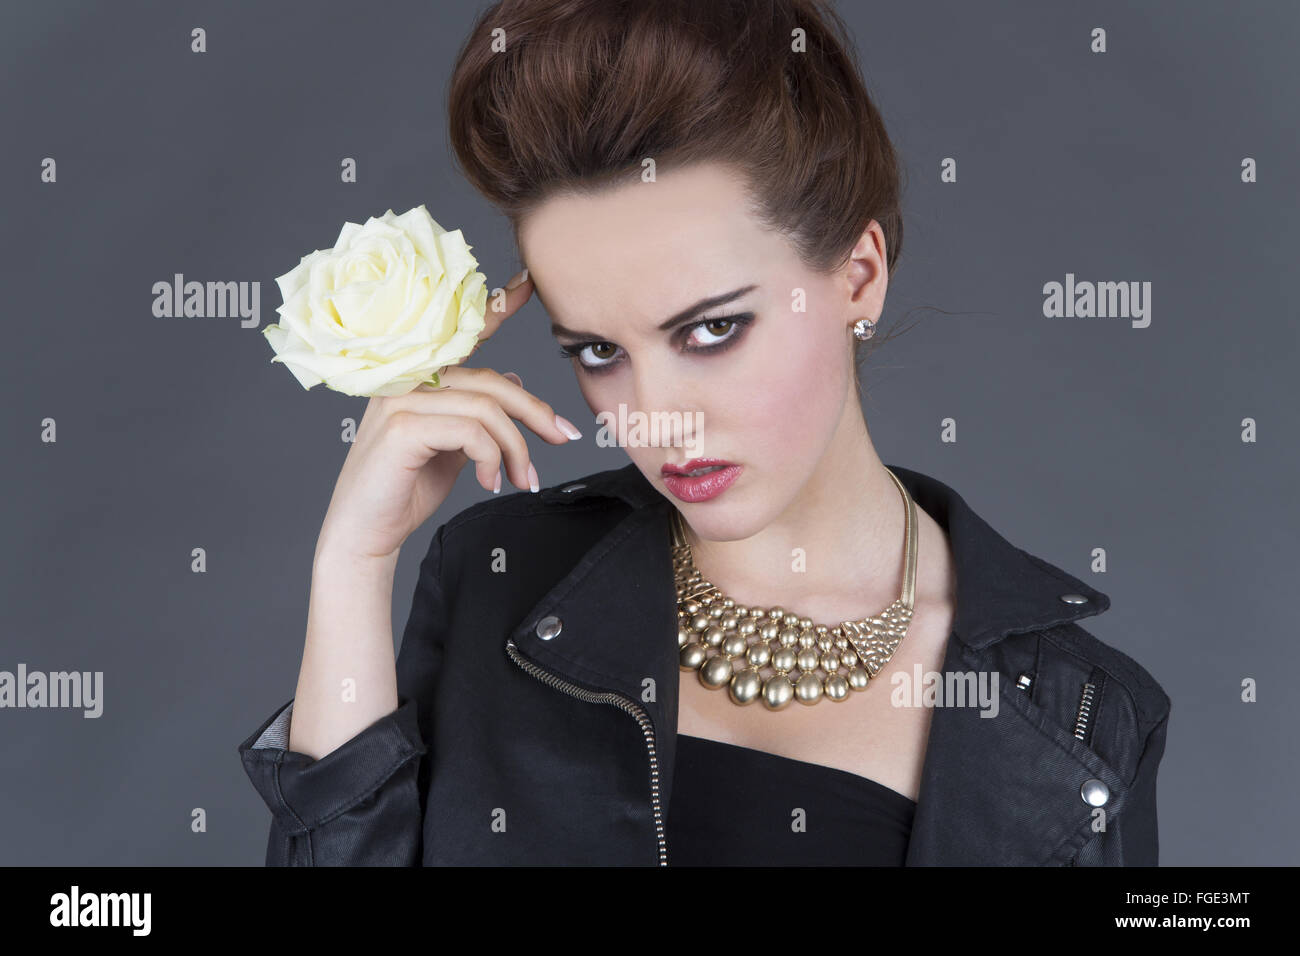 Young woman in leather outfit with white rose Stock Photo